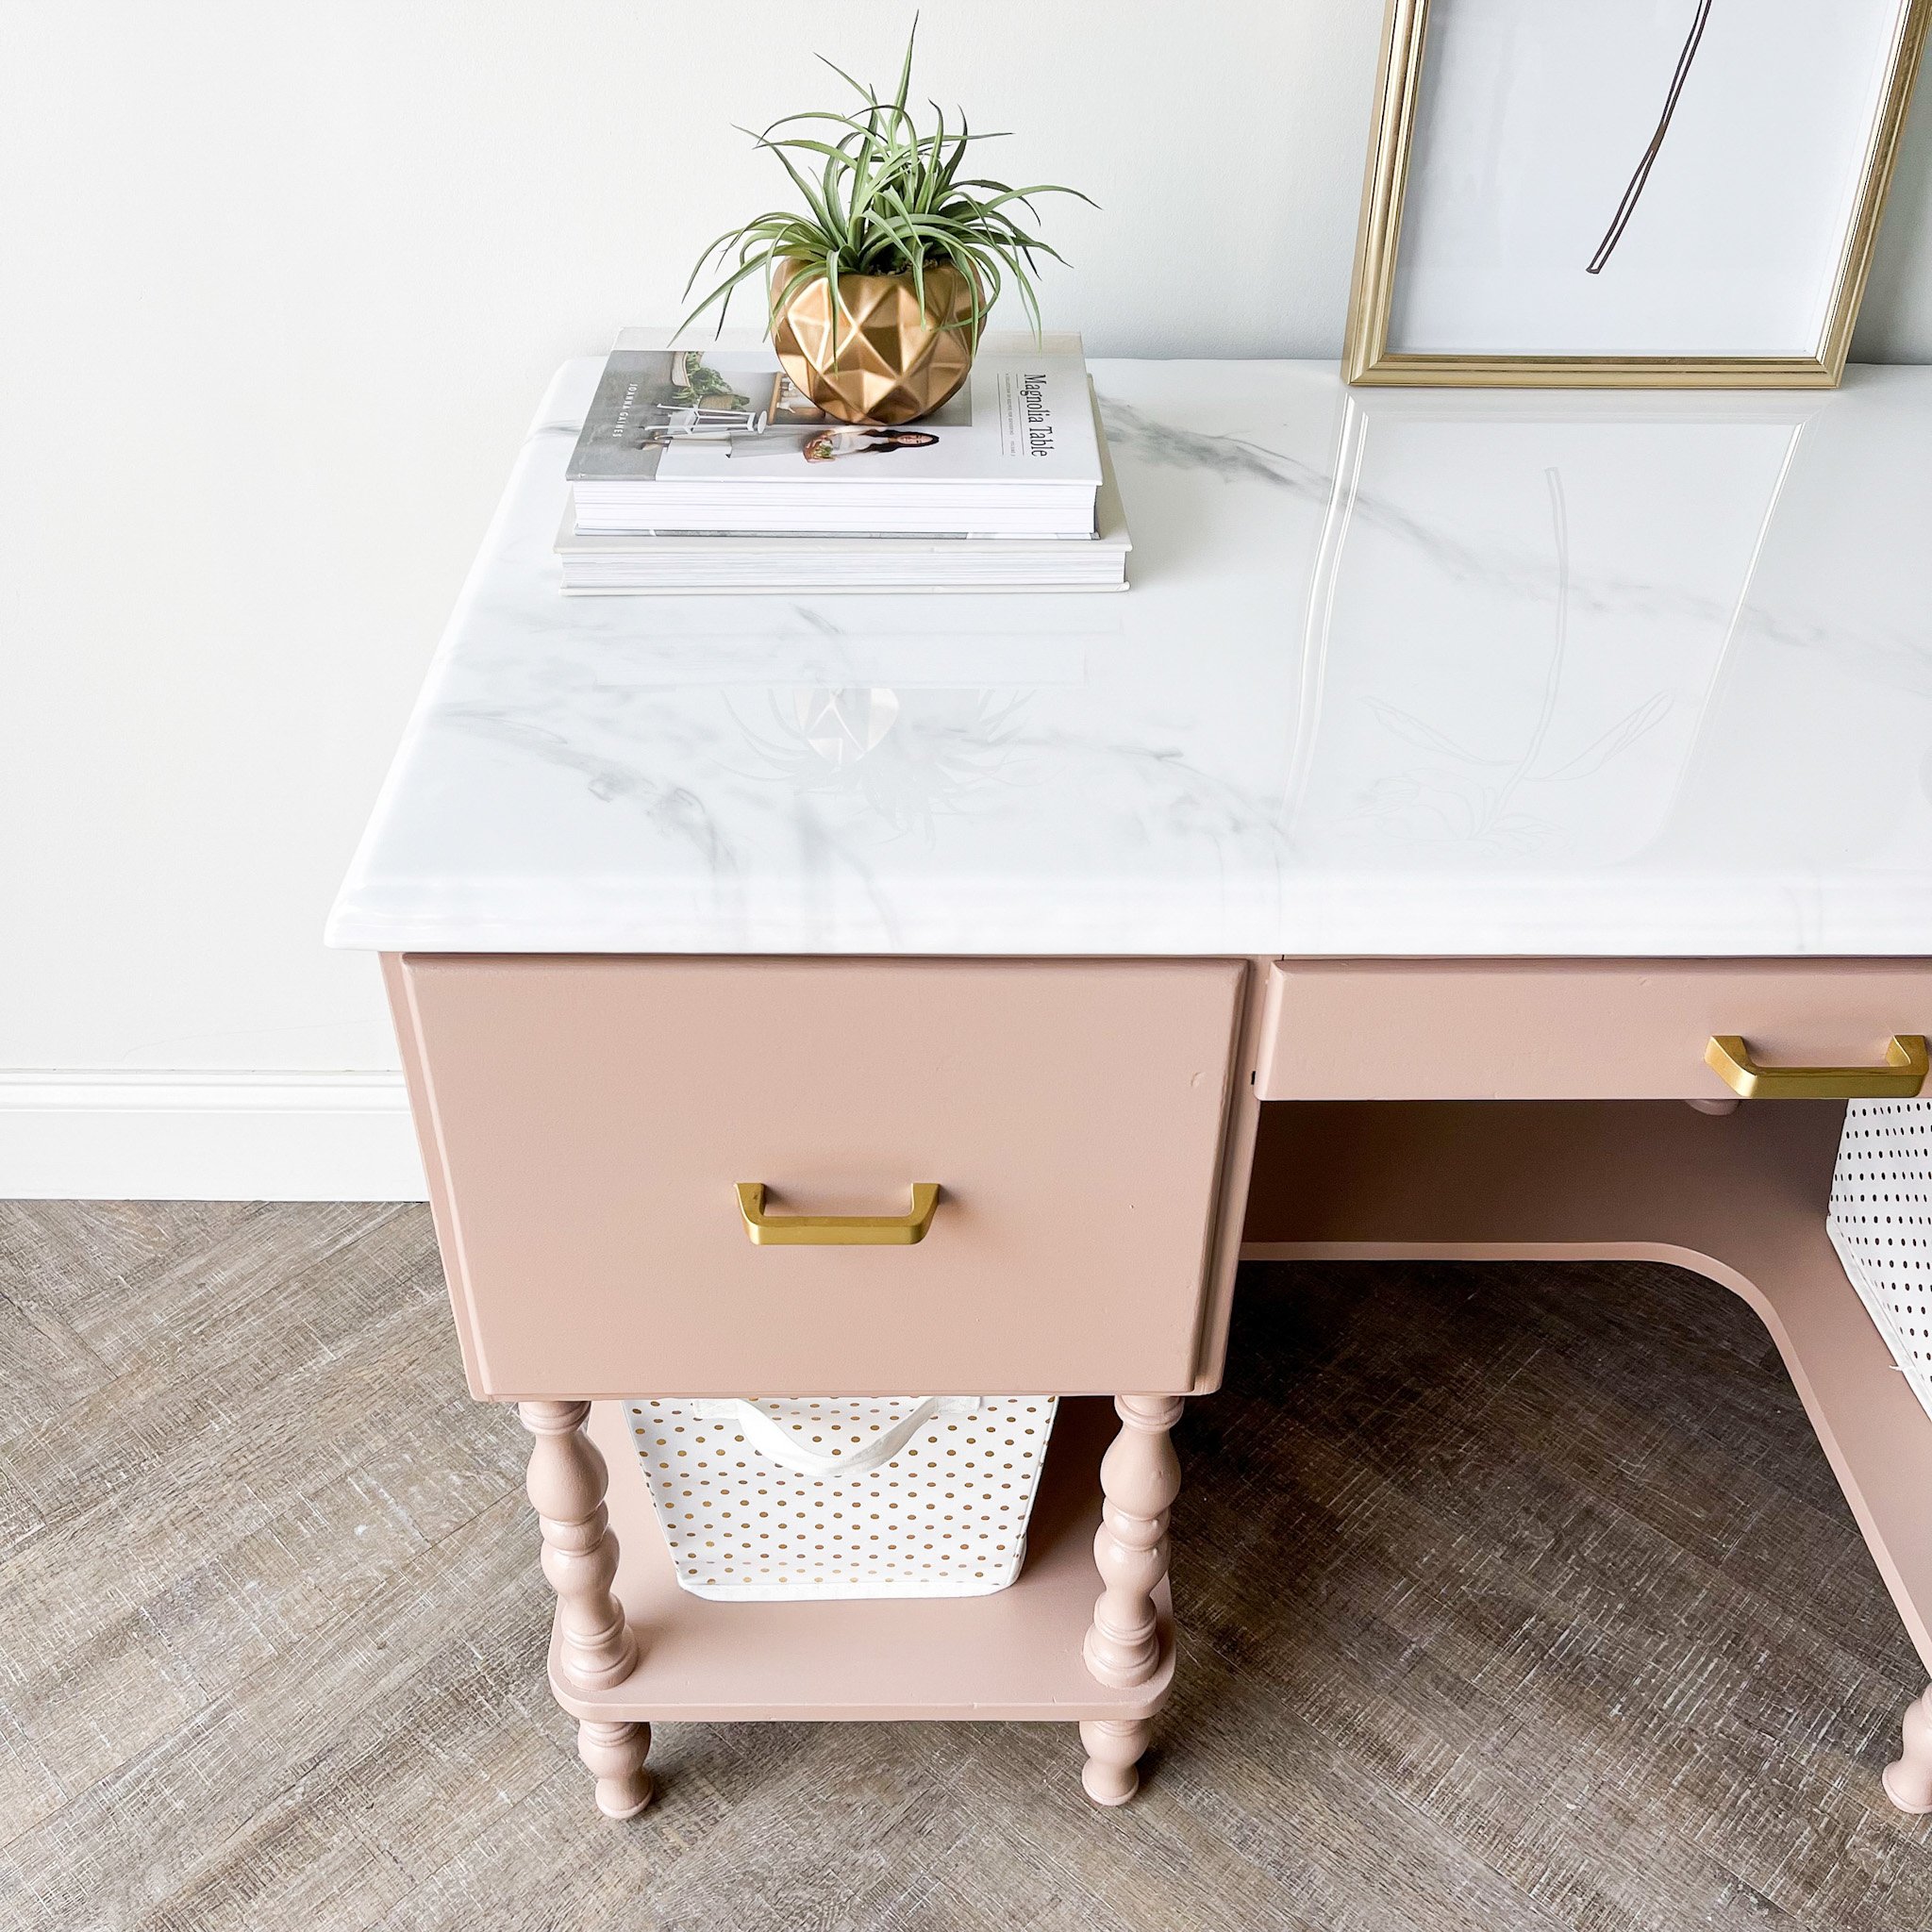 Using Epoxy to Create a Faux Marble Top: Glam Desk Makeover